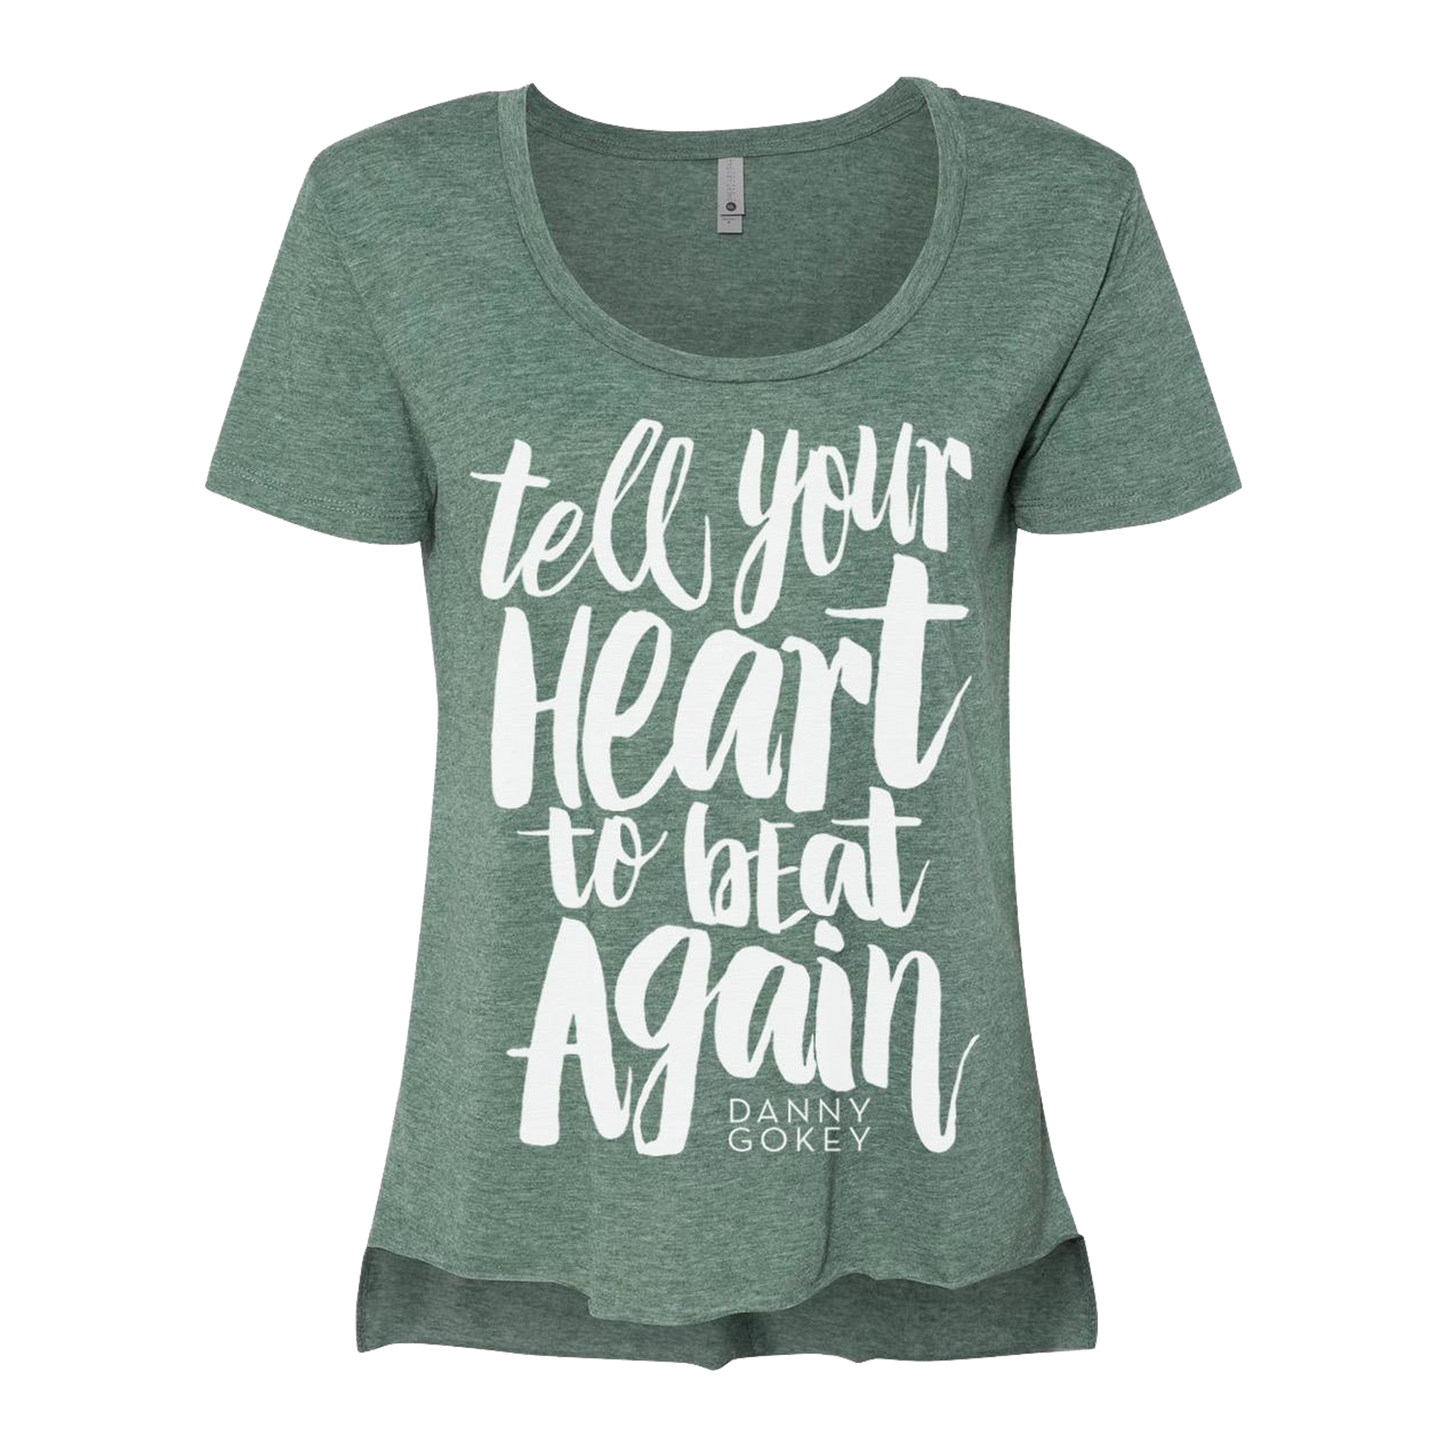 Tell your heart to beat again white cursive design royal pine green ladies dolman slouchy fit tee product shot Danny Gokey